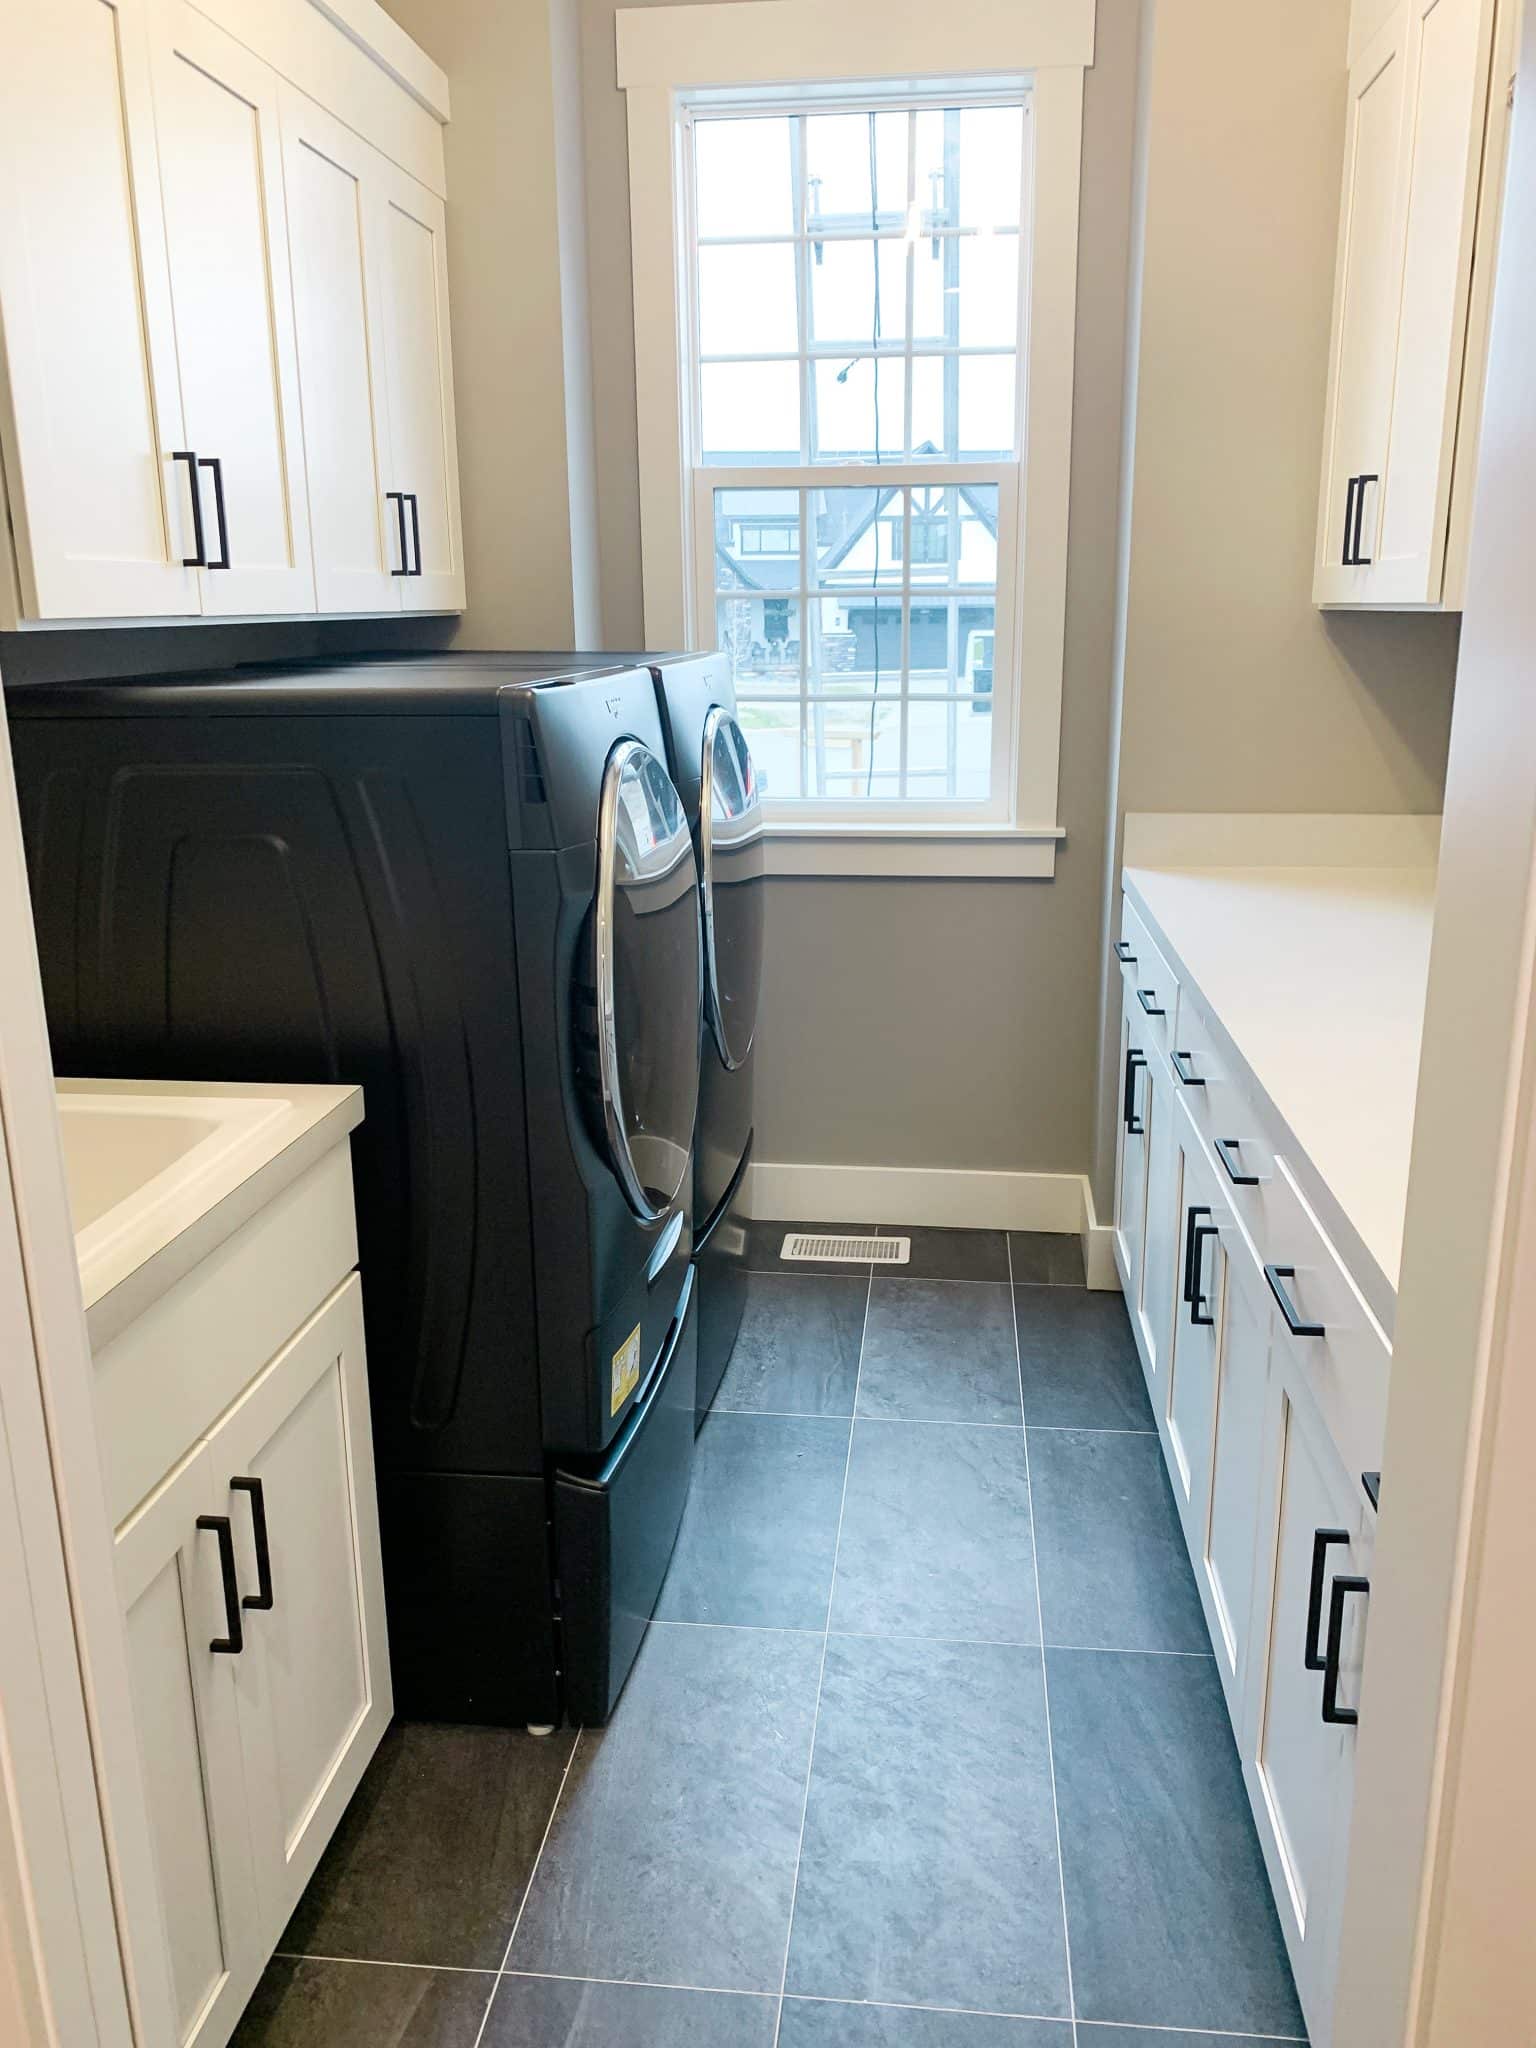 White laundry room, Laundry room cabinets, New Home build ideas, Matte Black laundry, stilettos and diapers